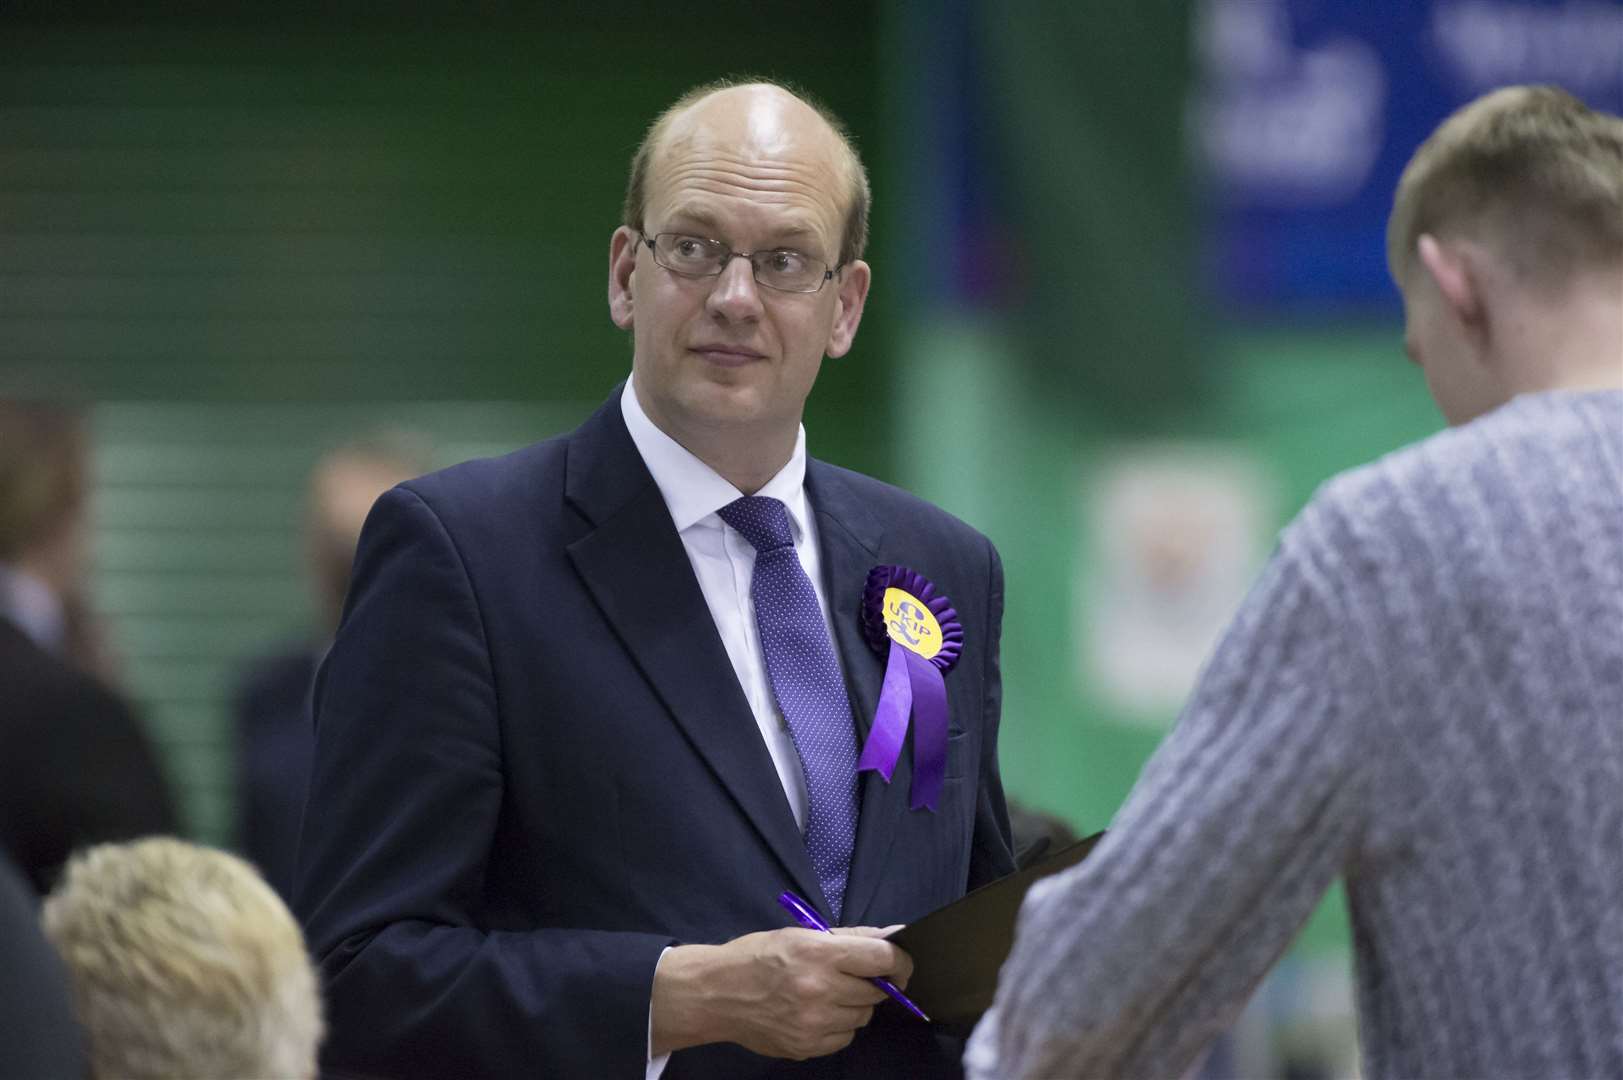 Mark 'today I'll be mostly voting for Ukip' Reckless